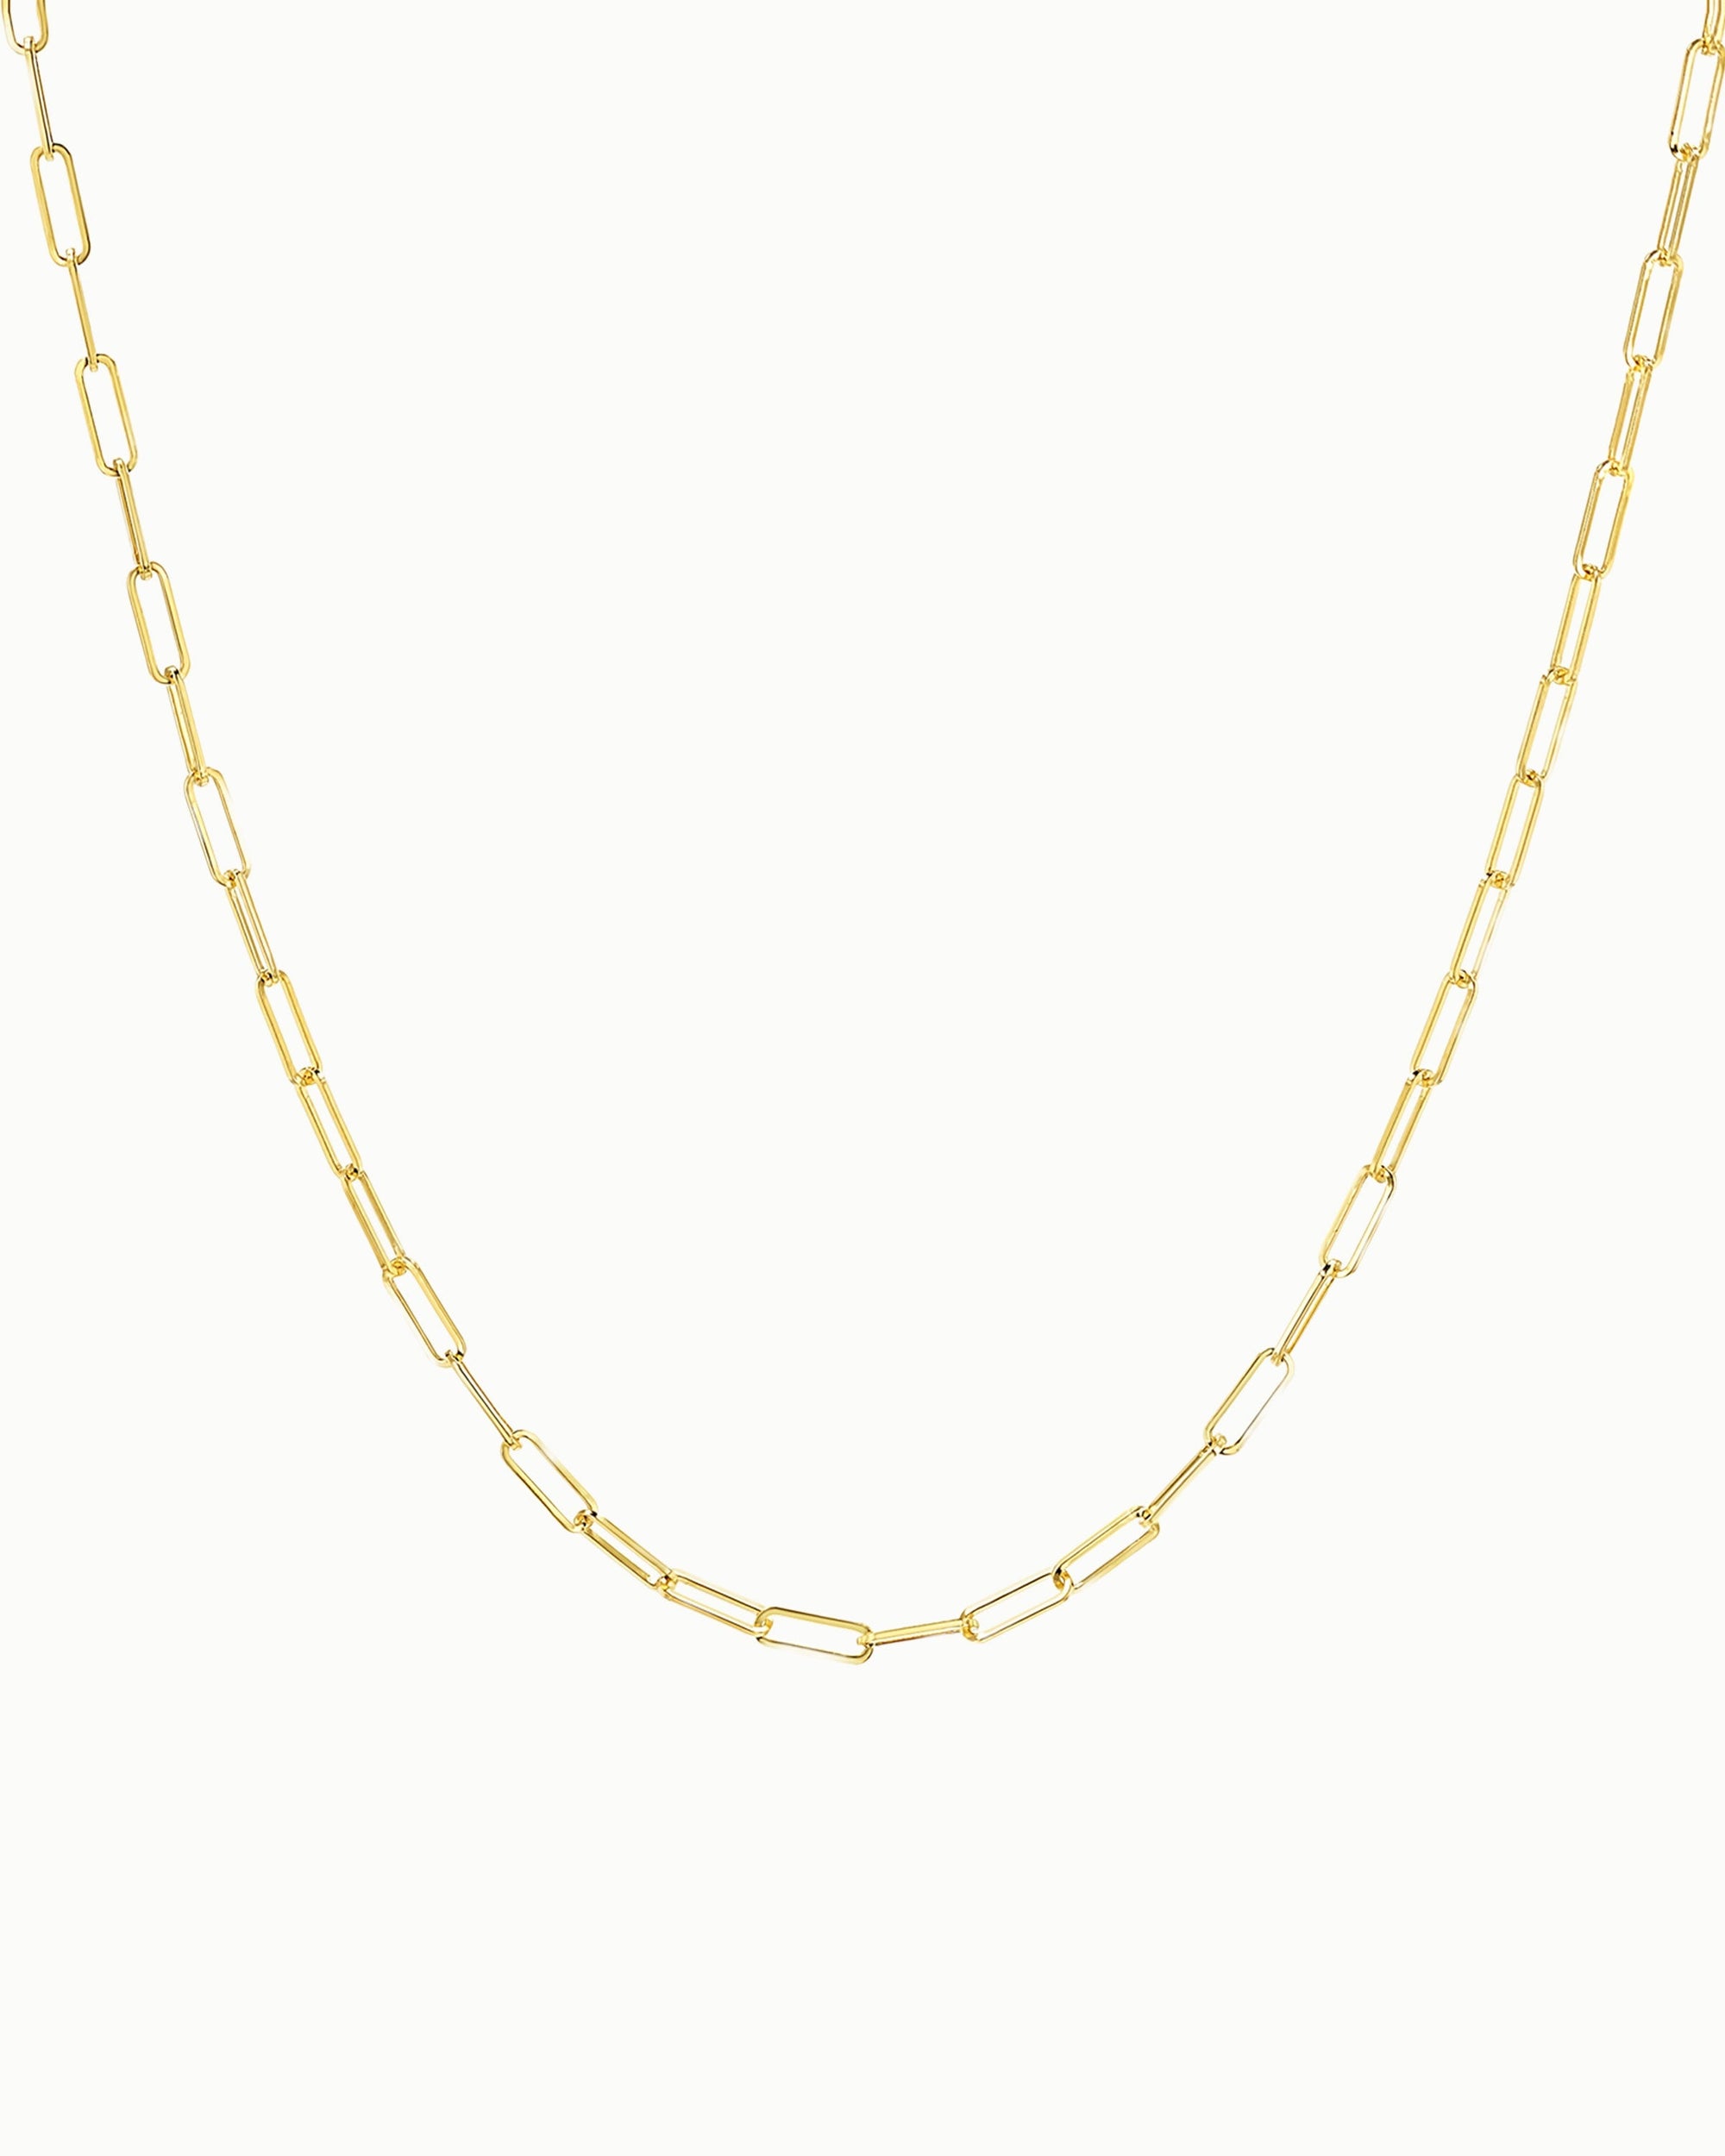 London Dainty Paperclip Luxe Necklace (Limited Time Offer)